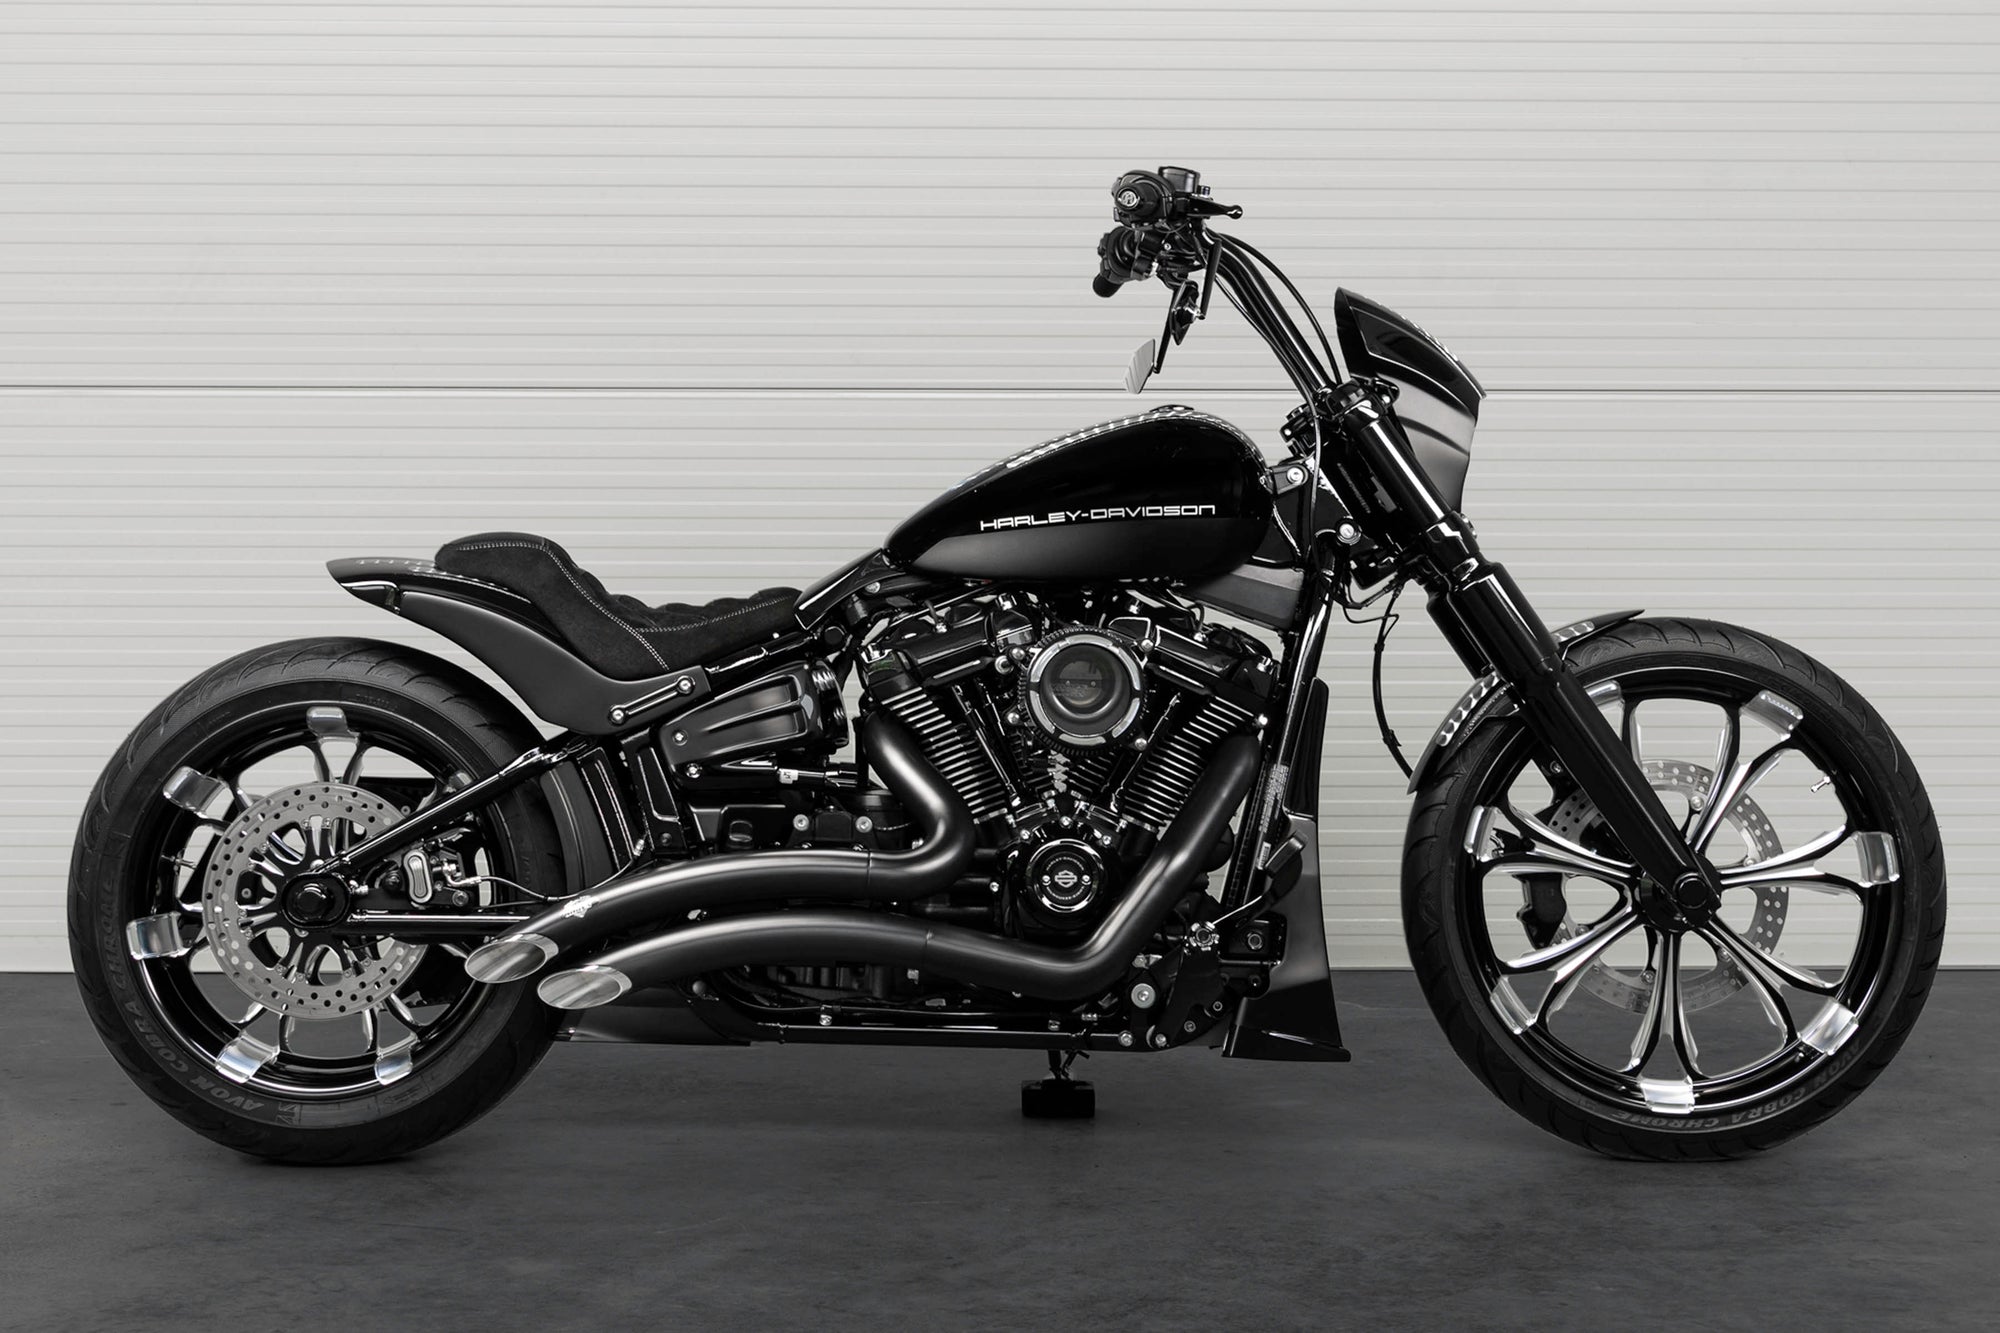 Harley Davidson motorcycle with Killer Custom parts from the side in a white modern bike shop